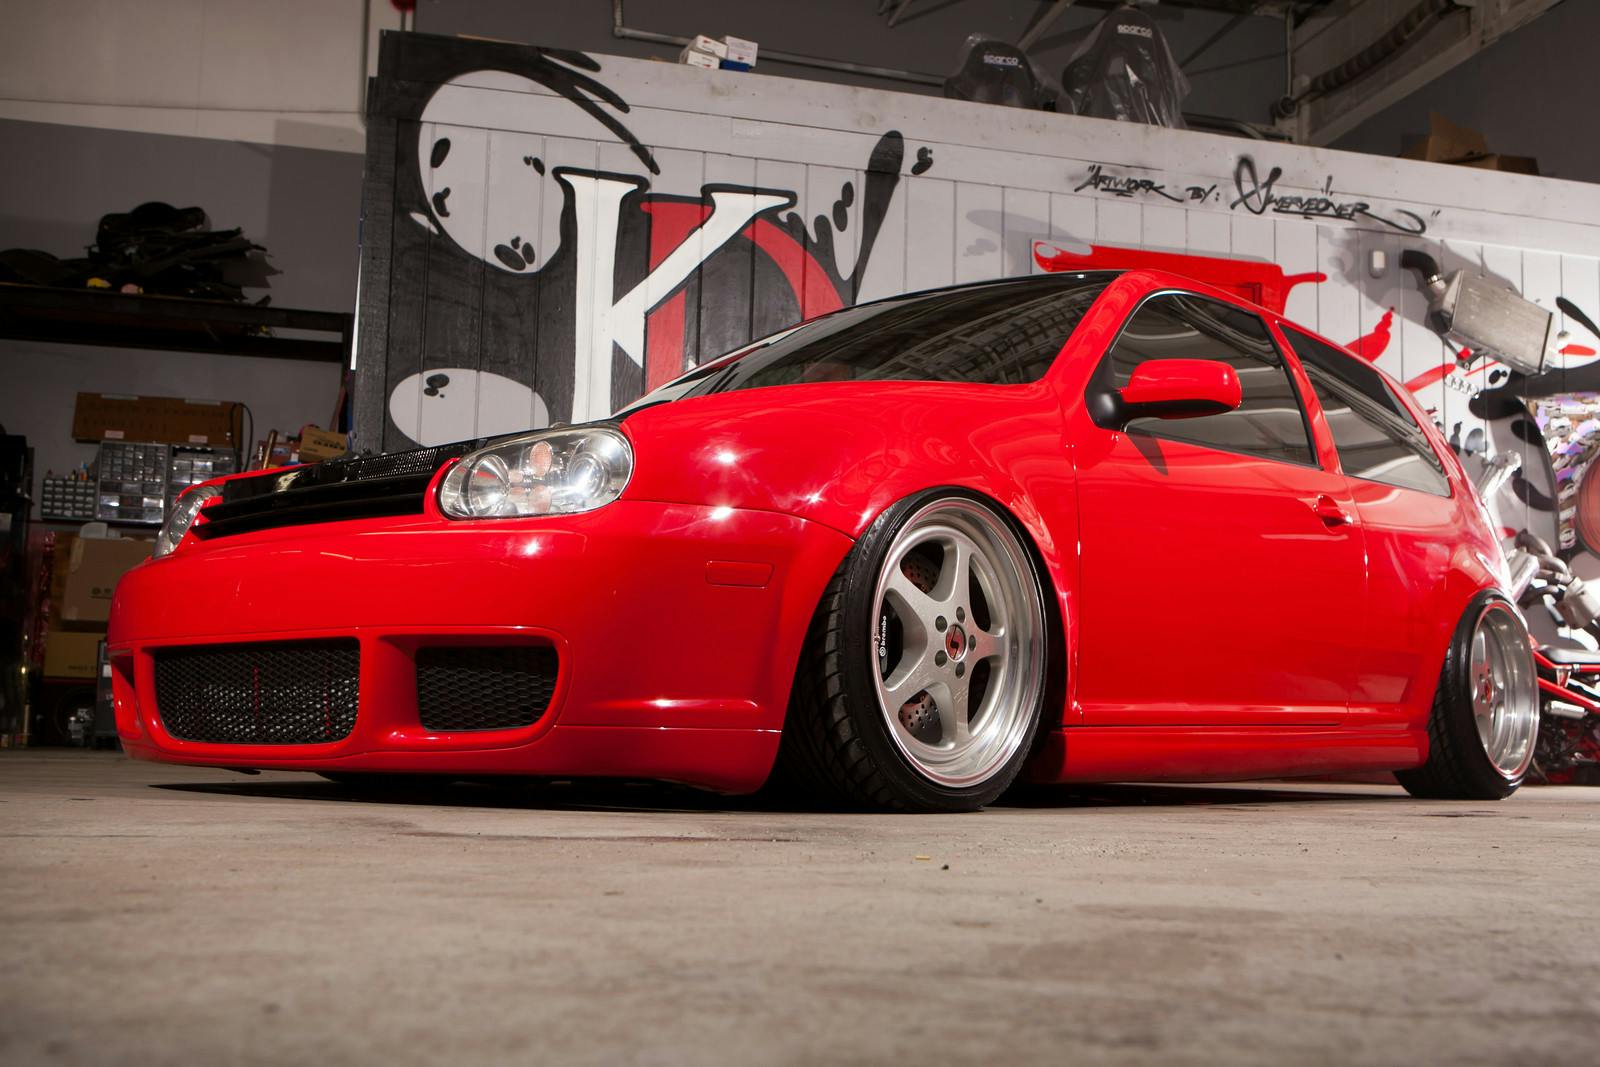 Kyle Duquesnay’s MK4 Golf on Air Lift Performance air suspension